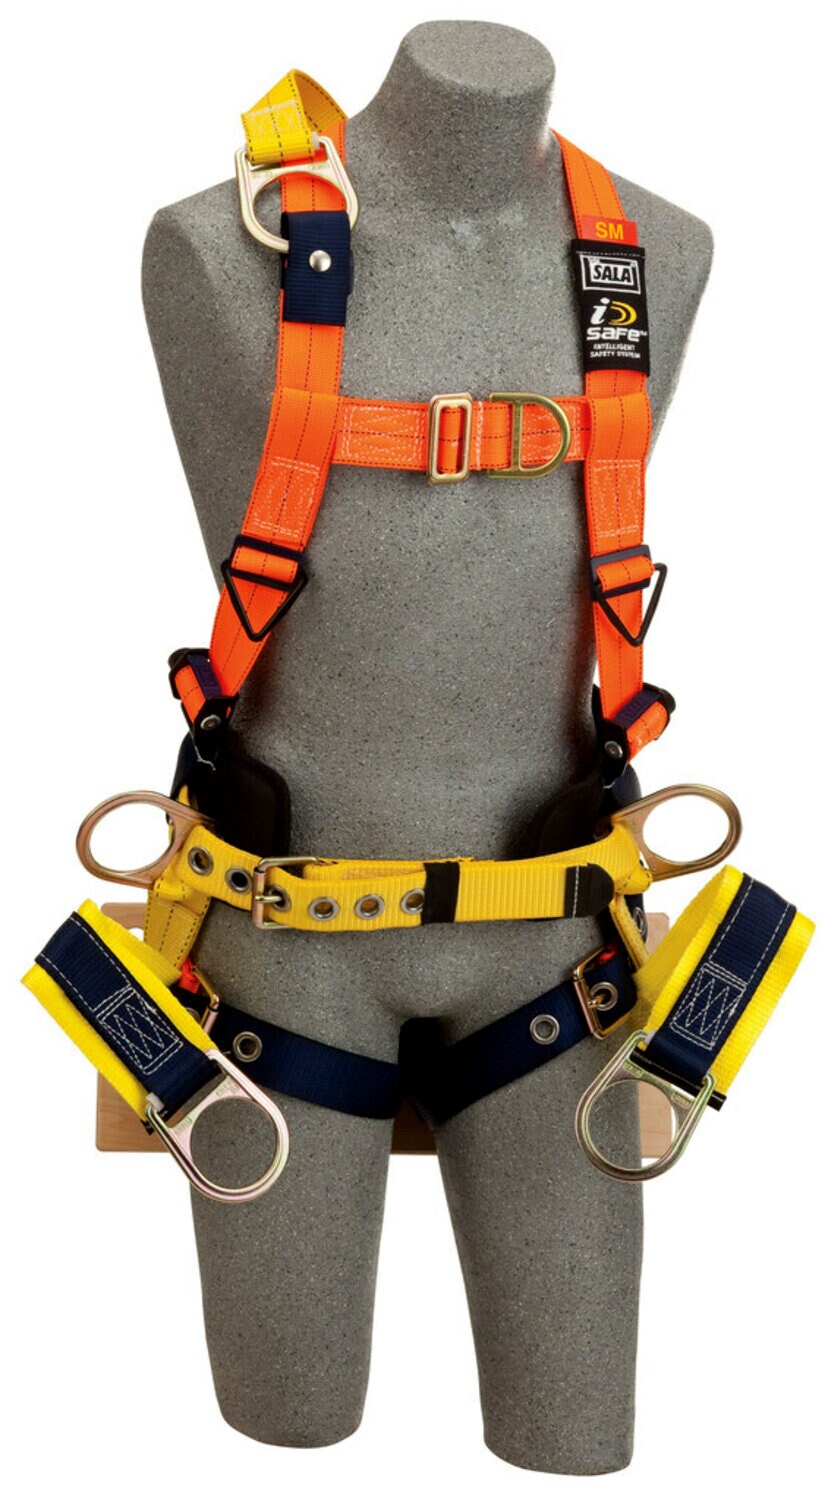 7100271457 - 3M DBI-SALA Delta Oil and Gas Climbing/Positioning/Suspension Safety Harness with Board Seat 1108125, Hi-Vis Orange, Large